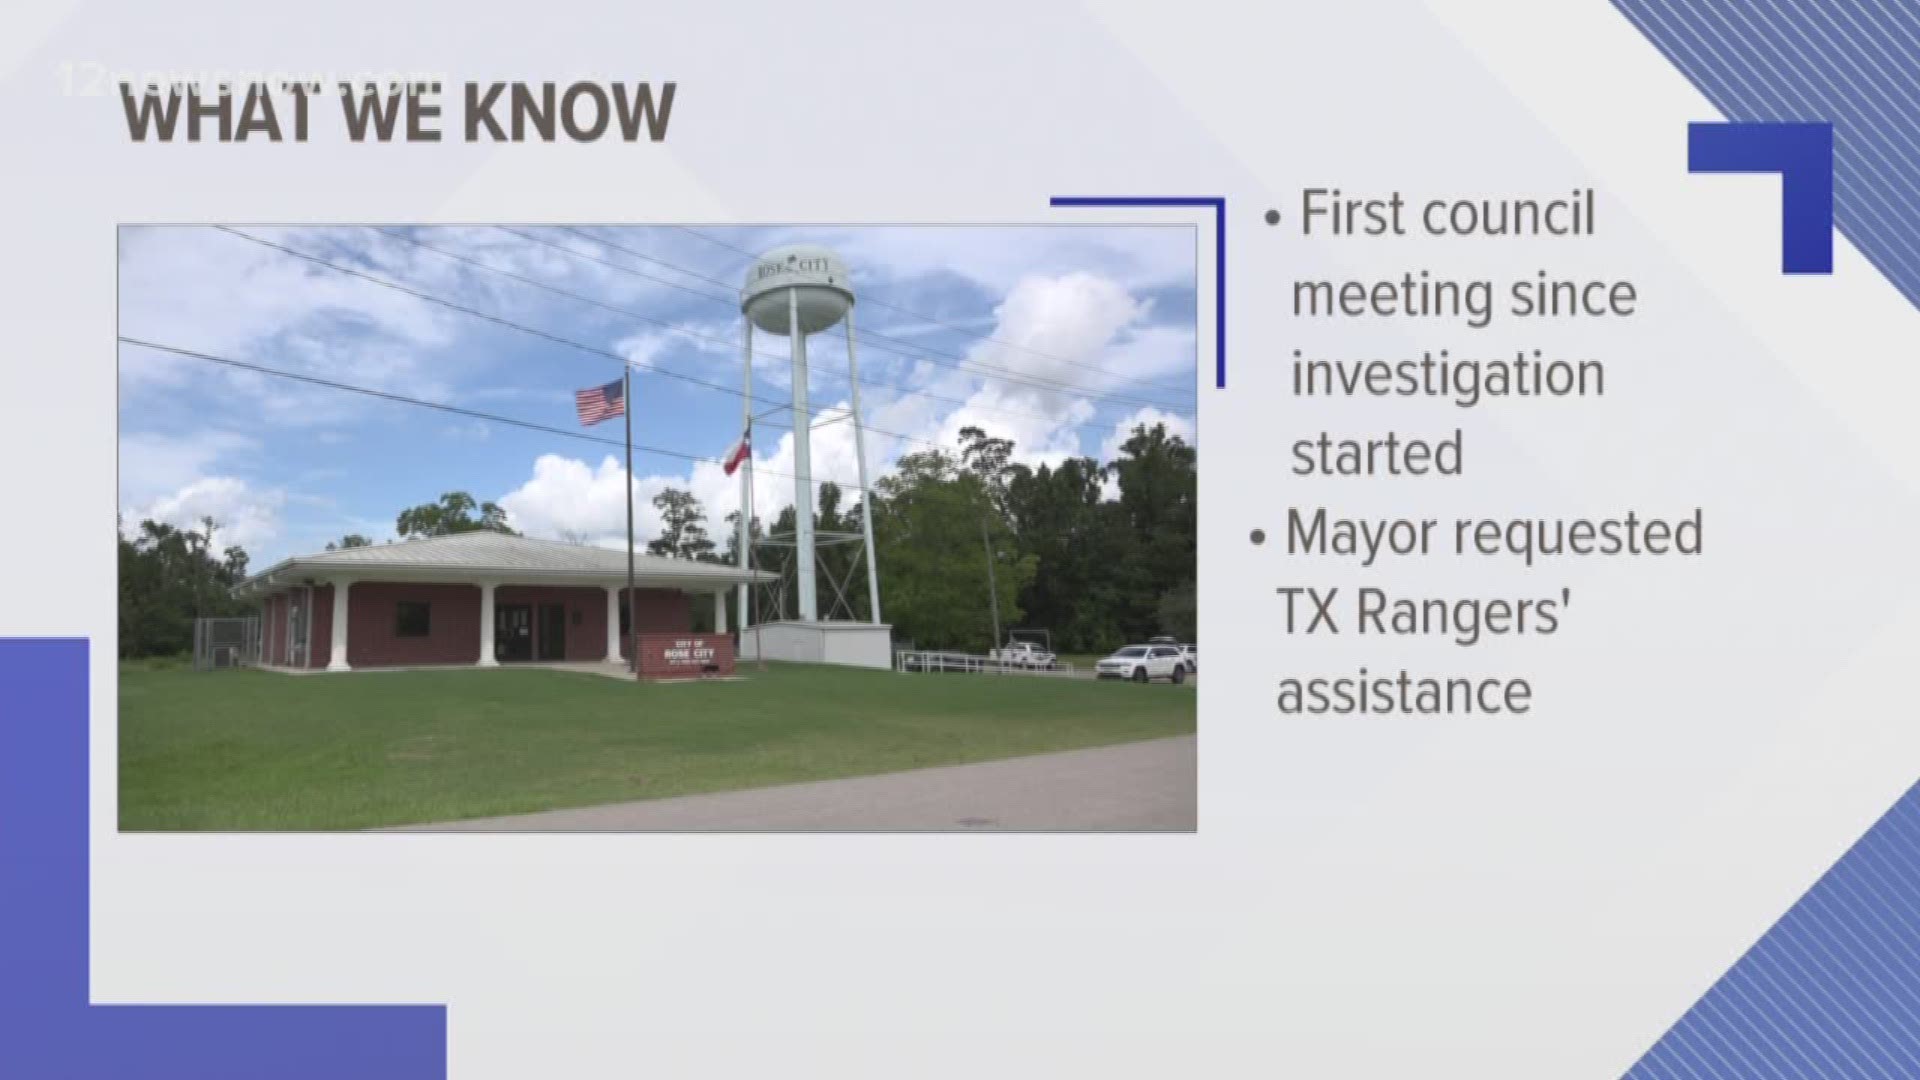 The mayor requested the Texas Rangers help with an investigation into alleged misappropriation of funds.